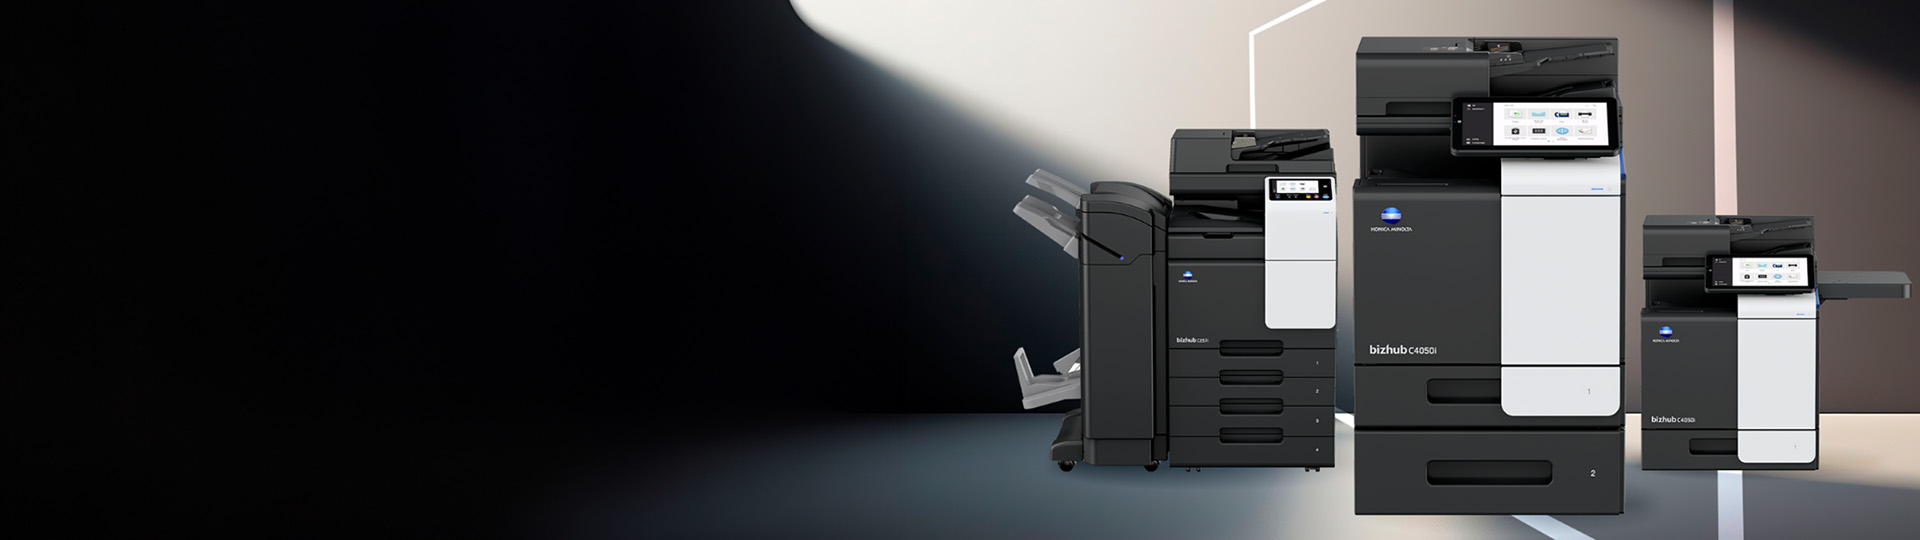 Find the most suitable printer for your office with Konica Minolta